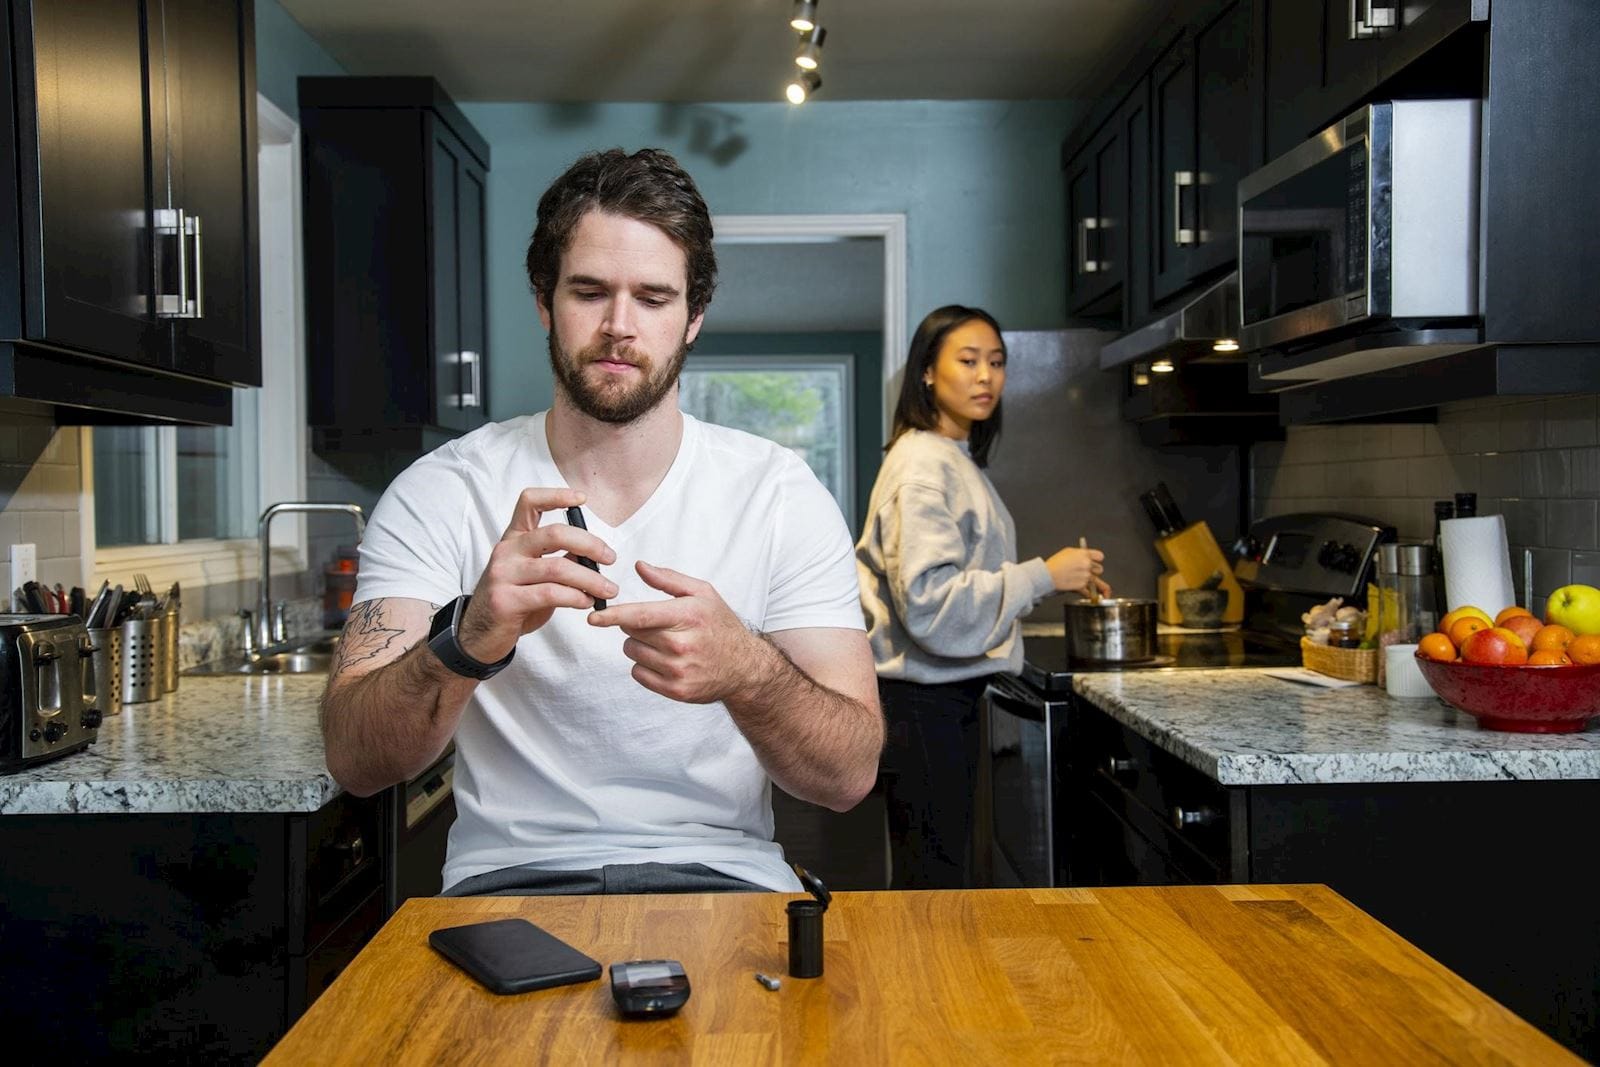 Man with diabetes checks his blood sugar with a finger prick while sitting in his kitchen